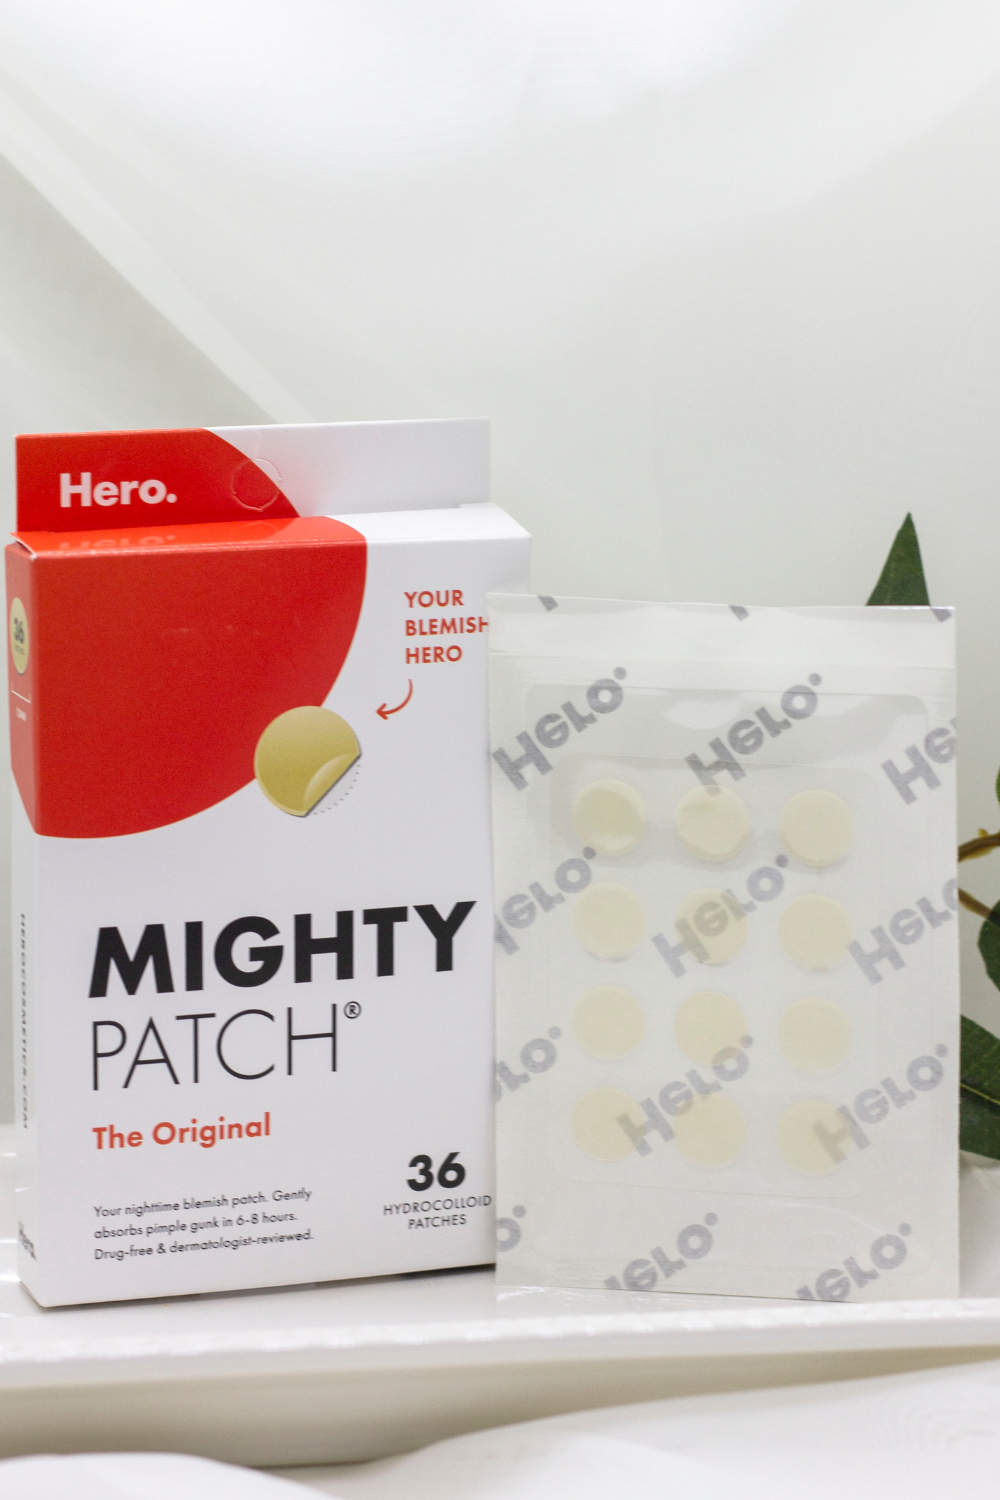 Featured: Hero Cosmetics' Mighty Patch Original packaging alongside a sheet of small hydrocolloid patches.